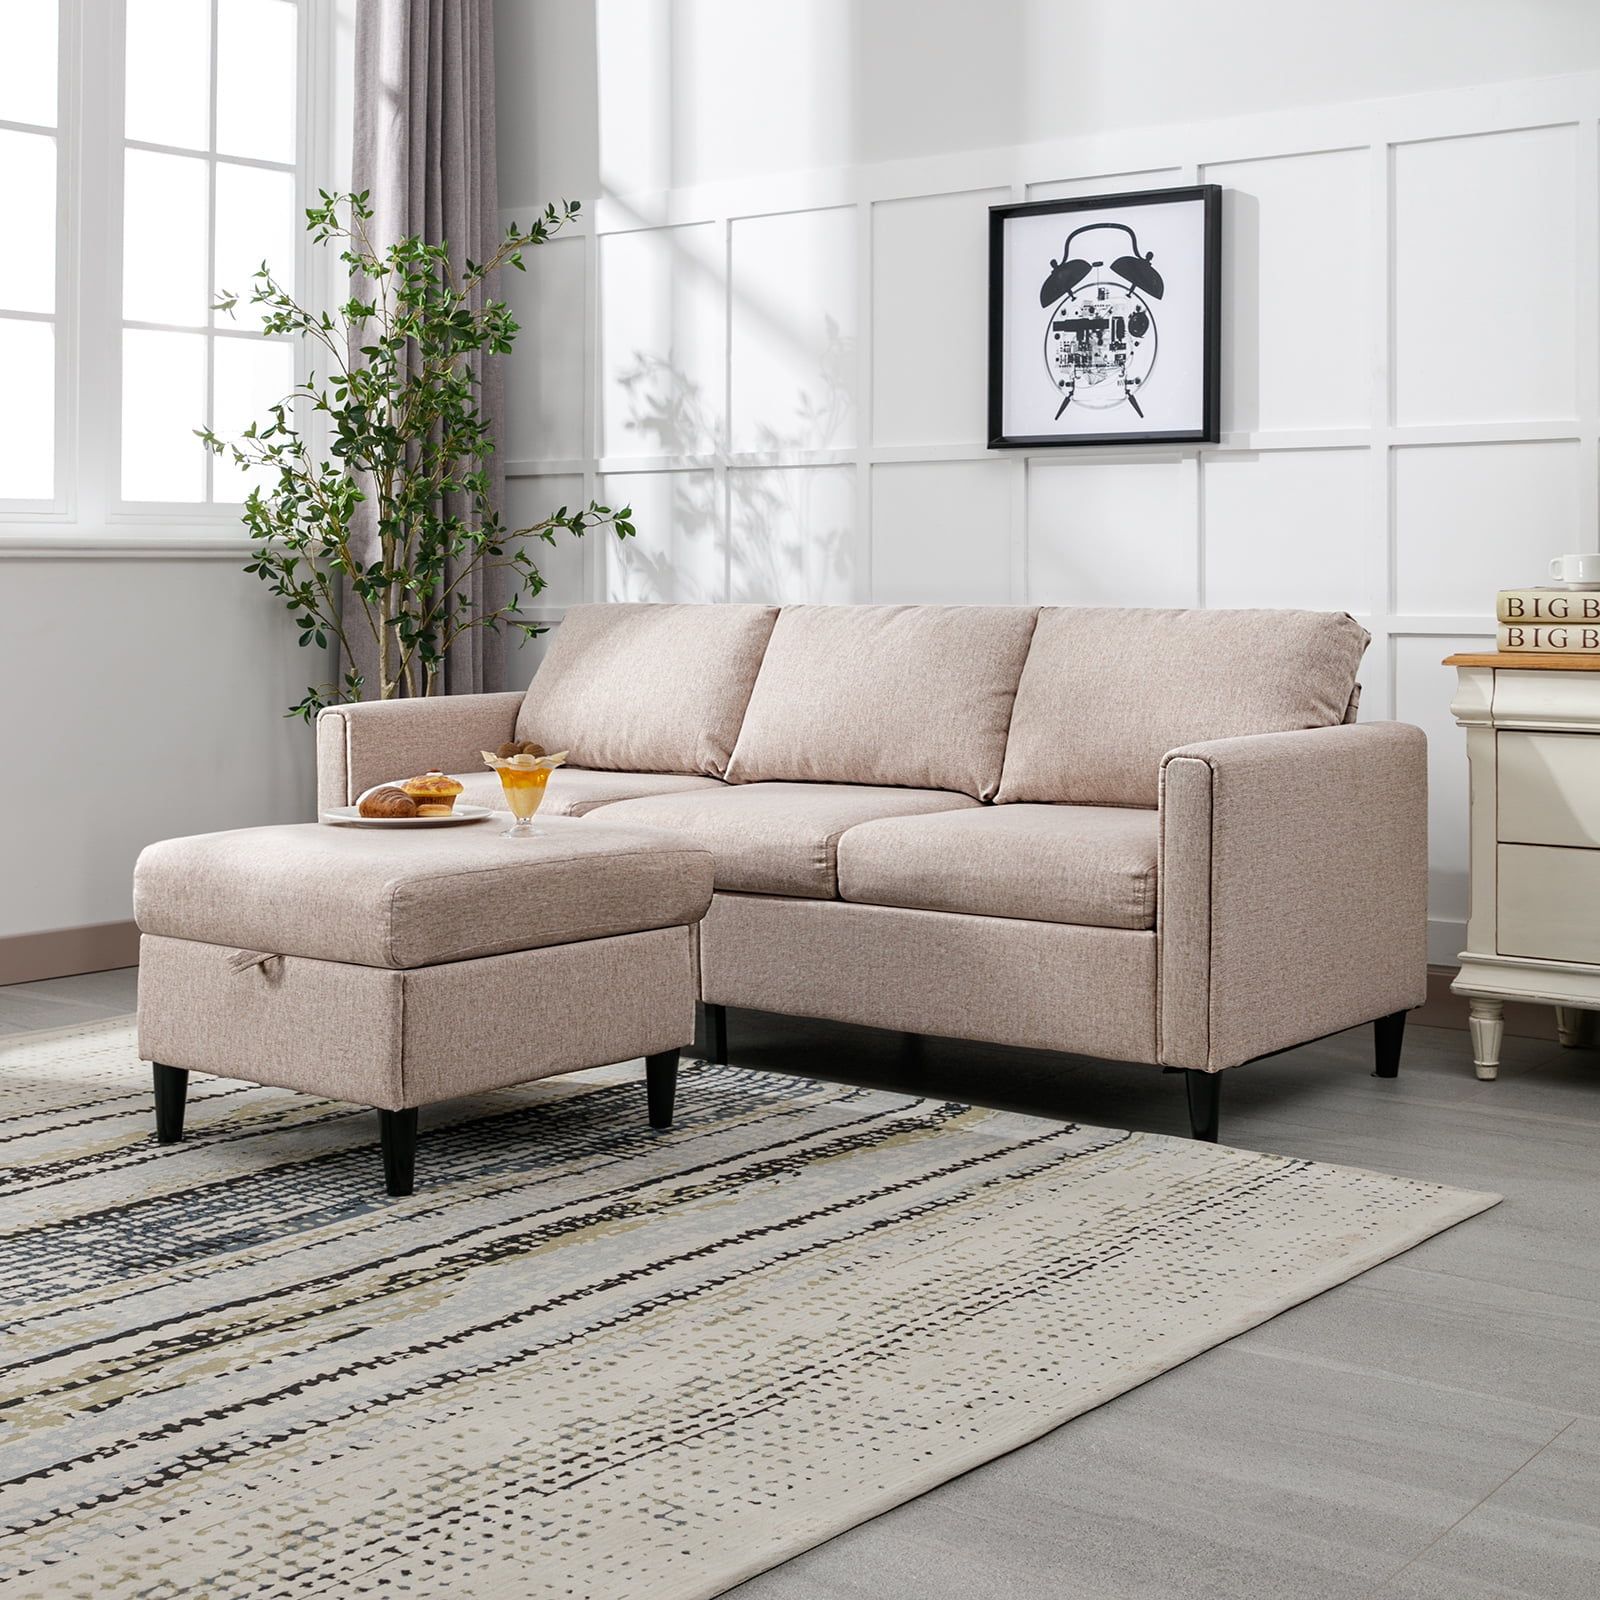 Zafly Convertible Sectional Sofa Couch, 3 Seat Upholstered Sofa With  Flexible Storage Ottoman Chaise, Modern Modular L Shape Couches For Living  Room/office – Beige – Walmart Pertaining To Beige L Shaped Sectional Sofas (View 9 of 15)